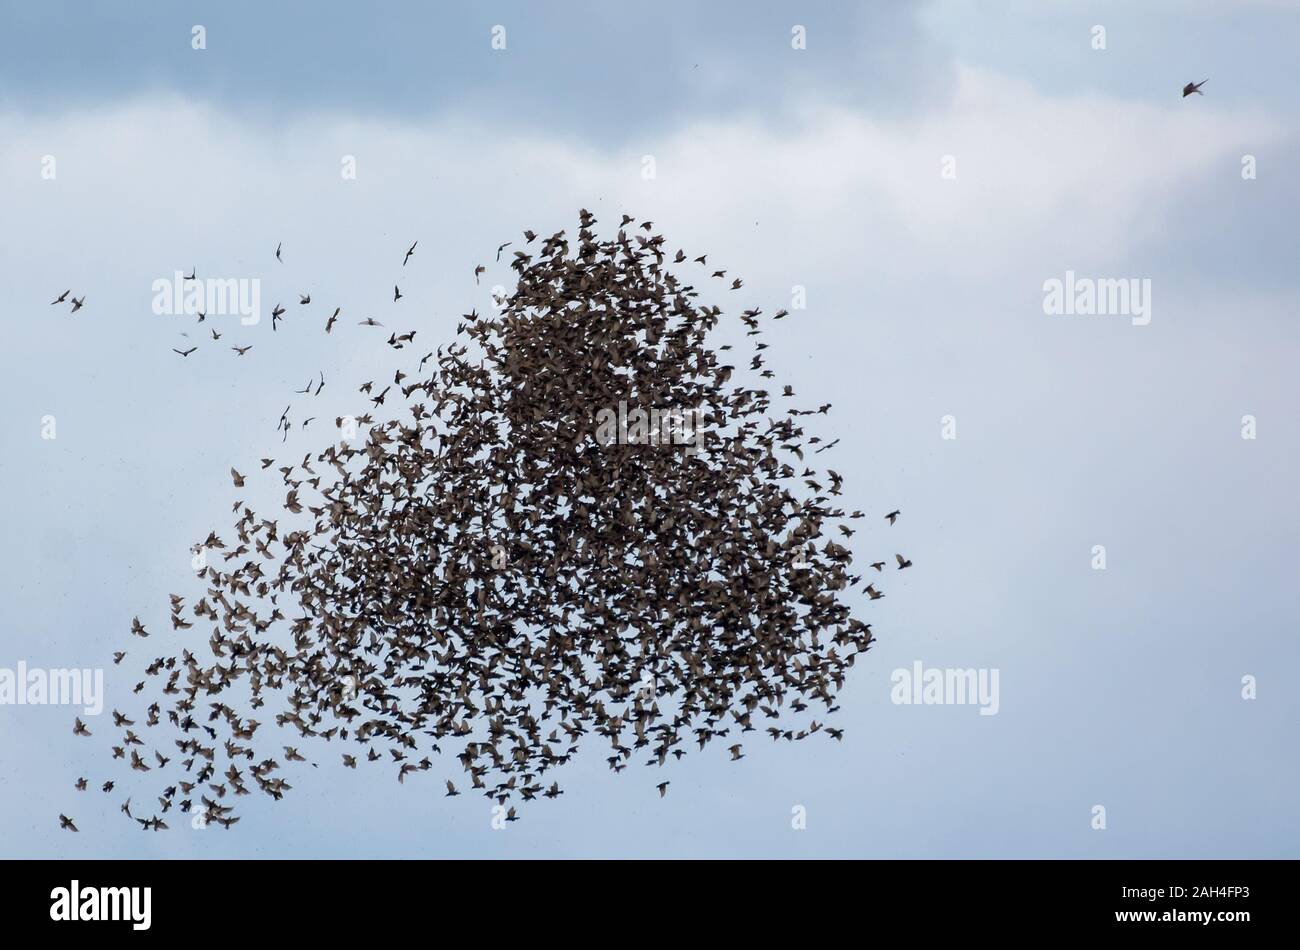 Bird of prey sparrowhawk in dive attack on big and dense flock of starlings in air Stock Photo